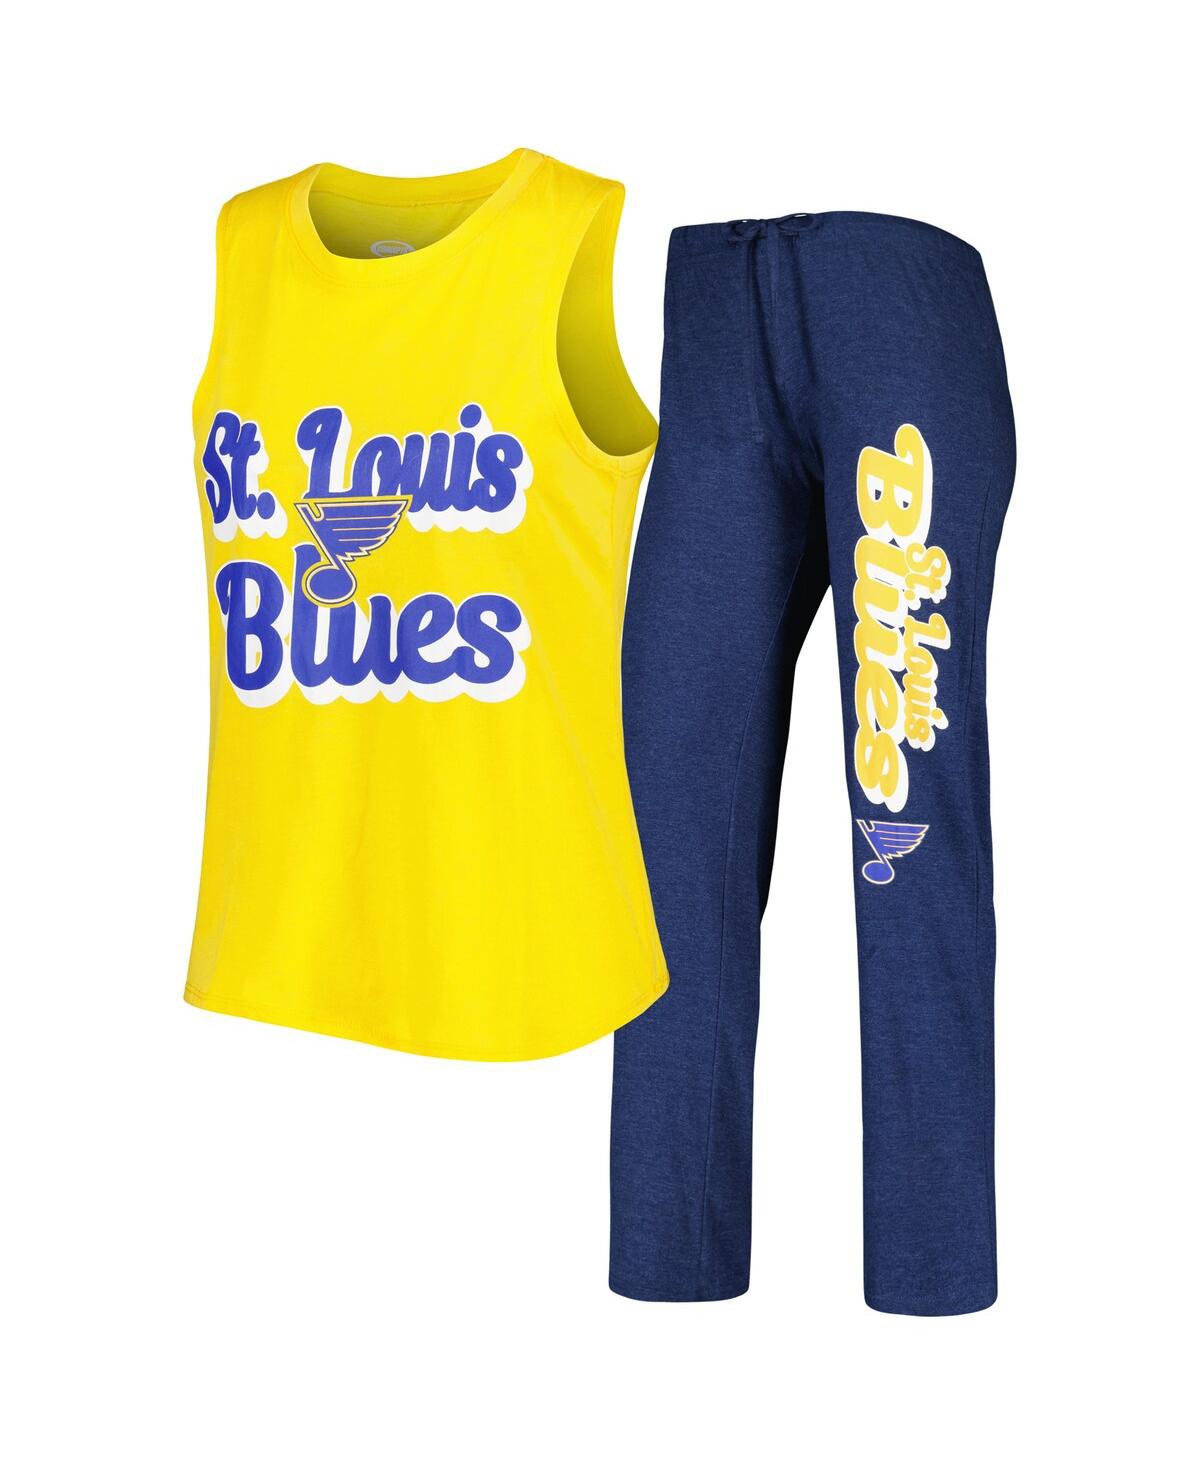 Women's Concepts Sport Gold, Navy St. Louis Blues Meter Muscle Tank Top and Pants Sleep Set - Gold, Navy